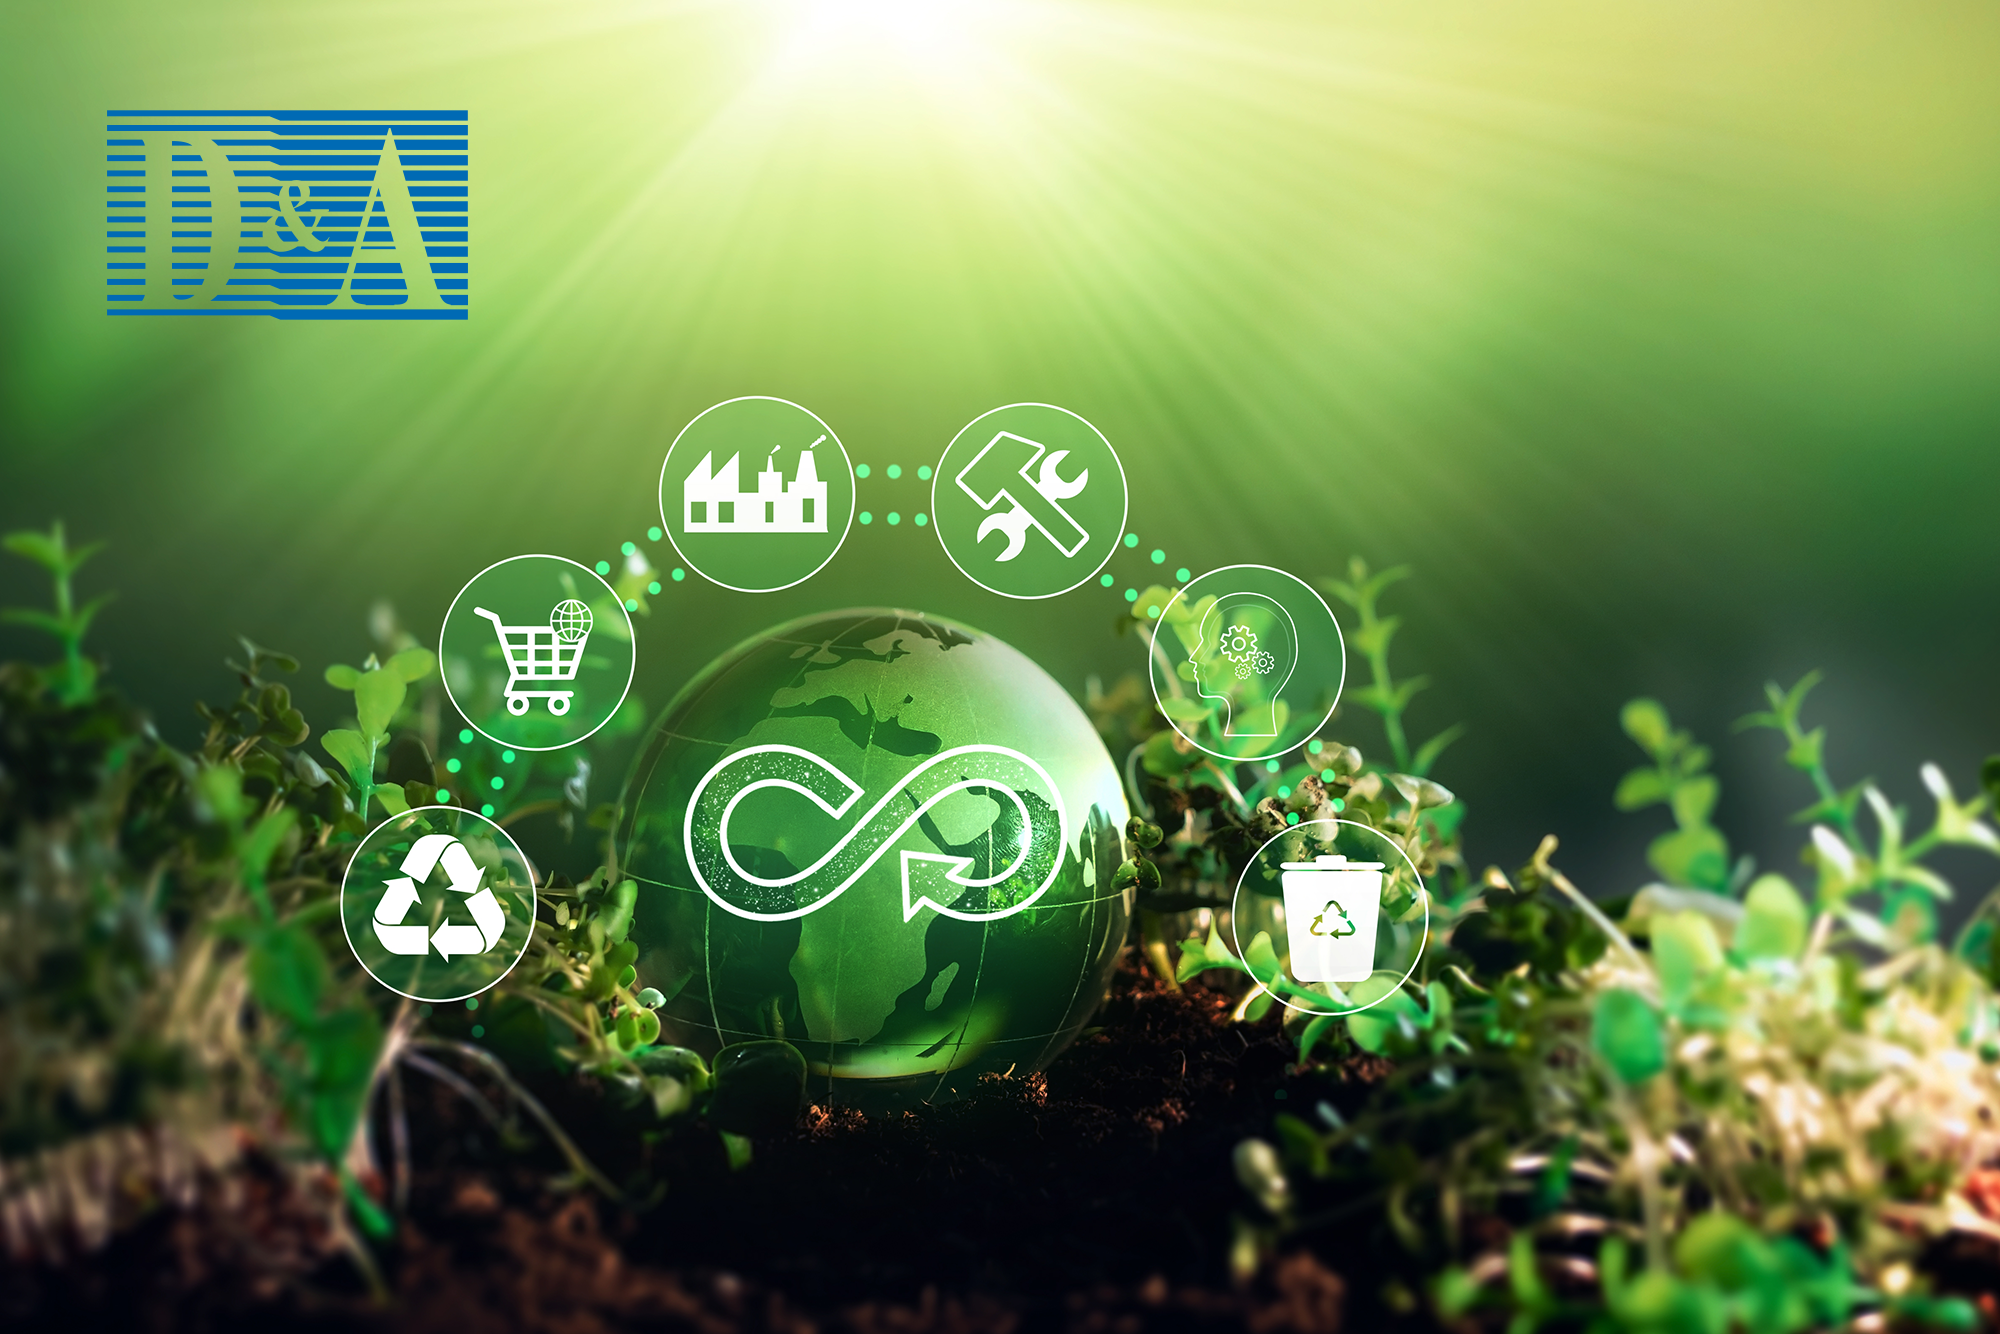 【D&A Knowledge Hub】What is the Role of Bio-based Materials in a Circular Economy?